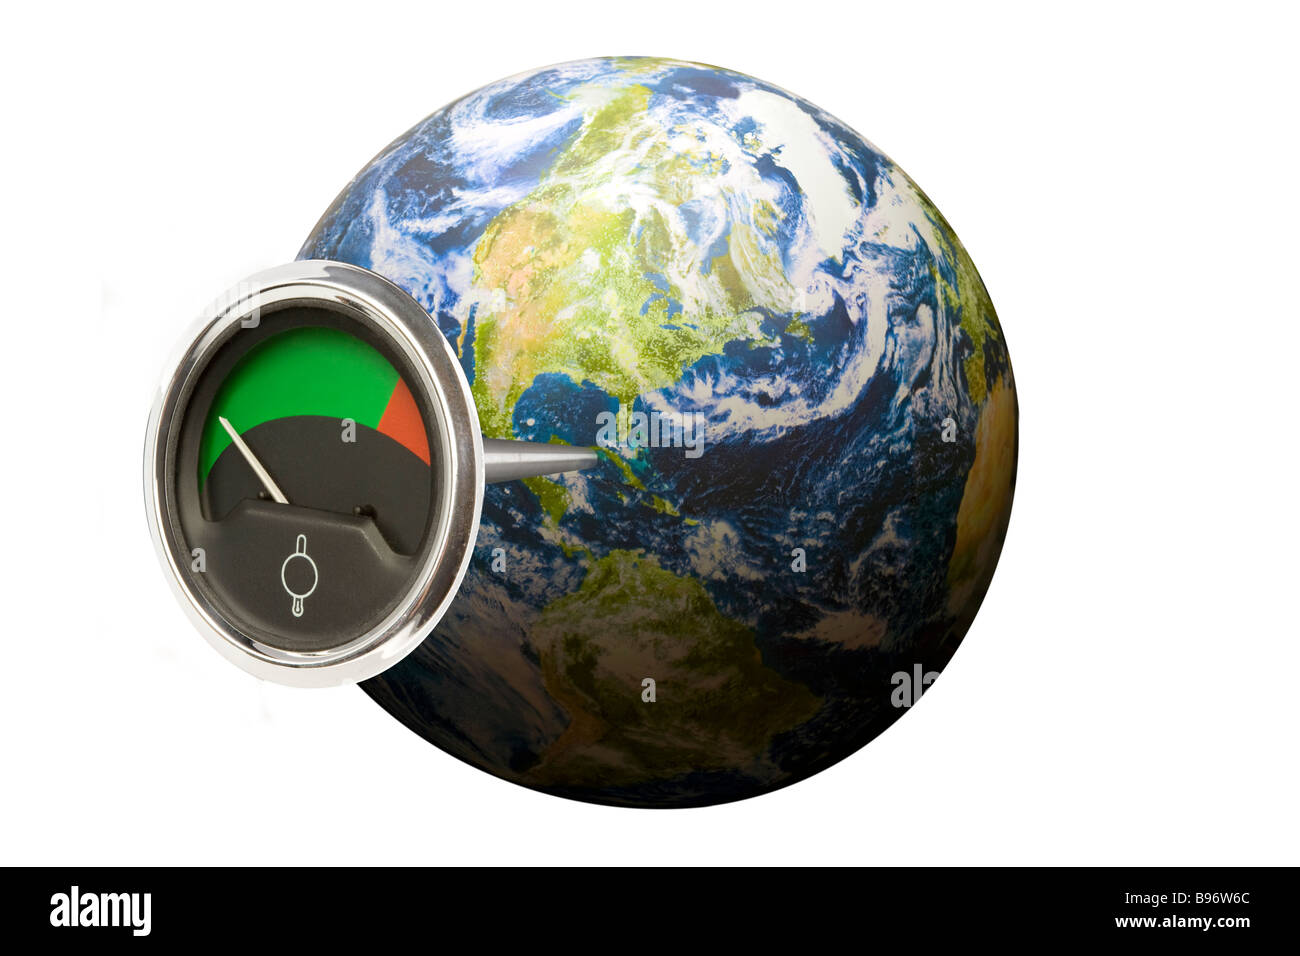 Gauge sticking out of planet earth depicting carbon emissions or a change in temperature environment of the planet Stock Photo